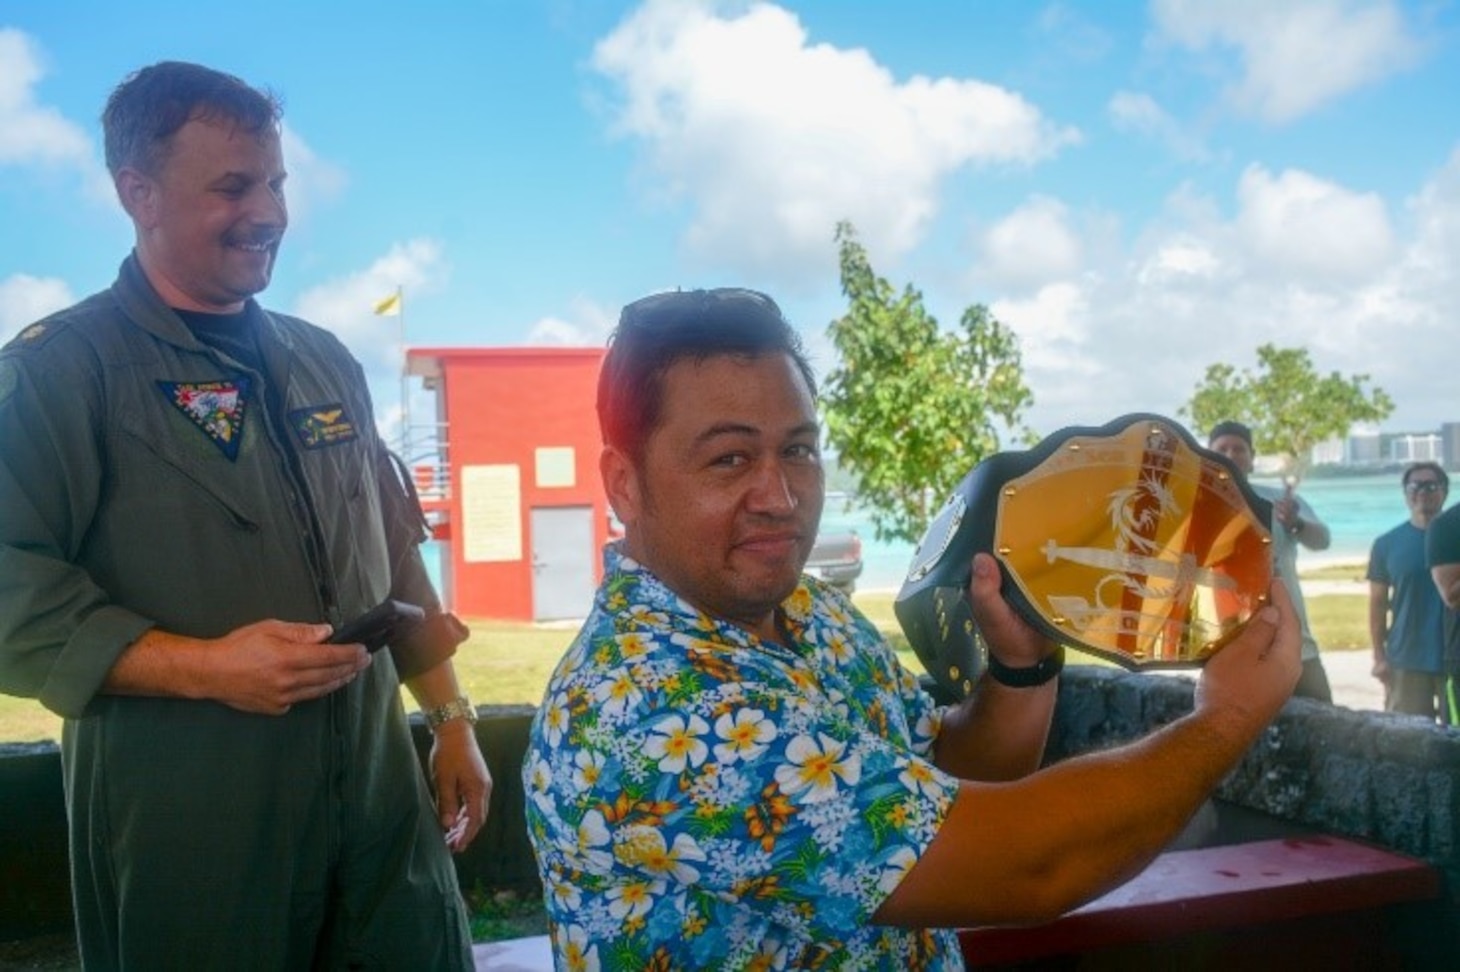 BEACH PARK, Guam (Jan. 27, 2020) - The officer in charge of the Royal New Zealand Navy team for Sea Dragon 2020 hoists the Anti-Submarine Warfare competition trophy, on behalf of his sailors. Sea Dragon is a multi-lateral anti-submarine warfare exercise that improves the interoperability elements required to effectively and cohesively respond to the defense of a regional contingency in the Indo- Pacific, while continuing to build and strengthen relationships held between nations.